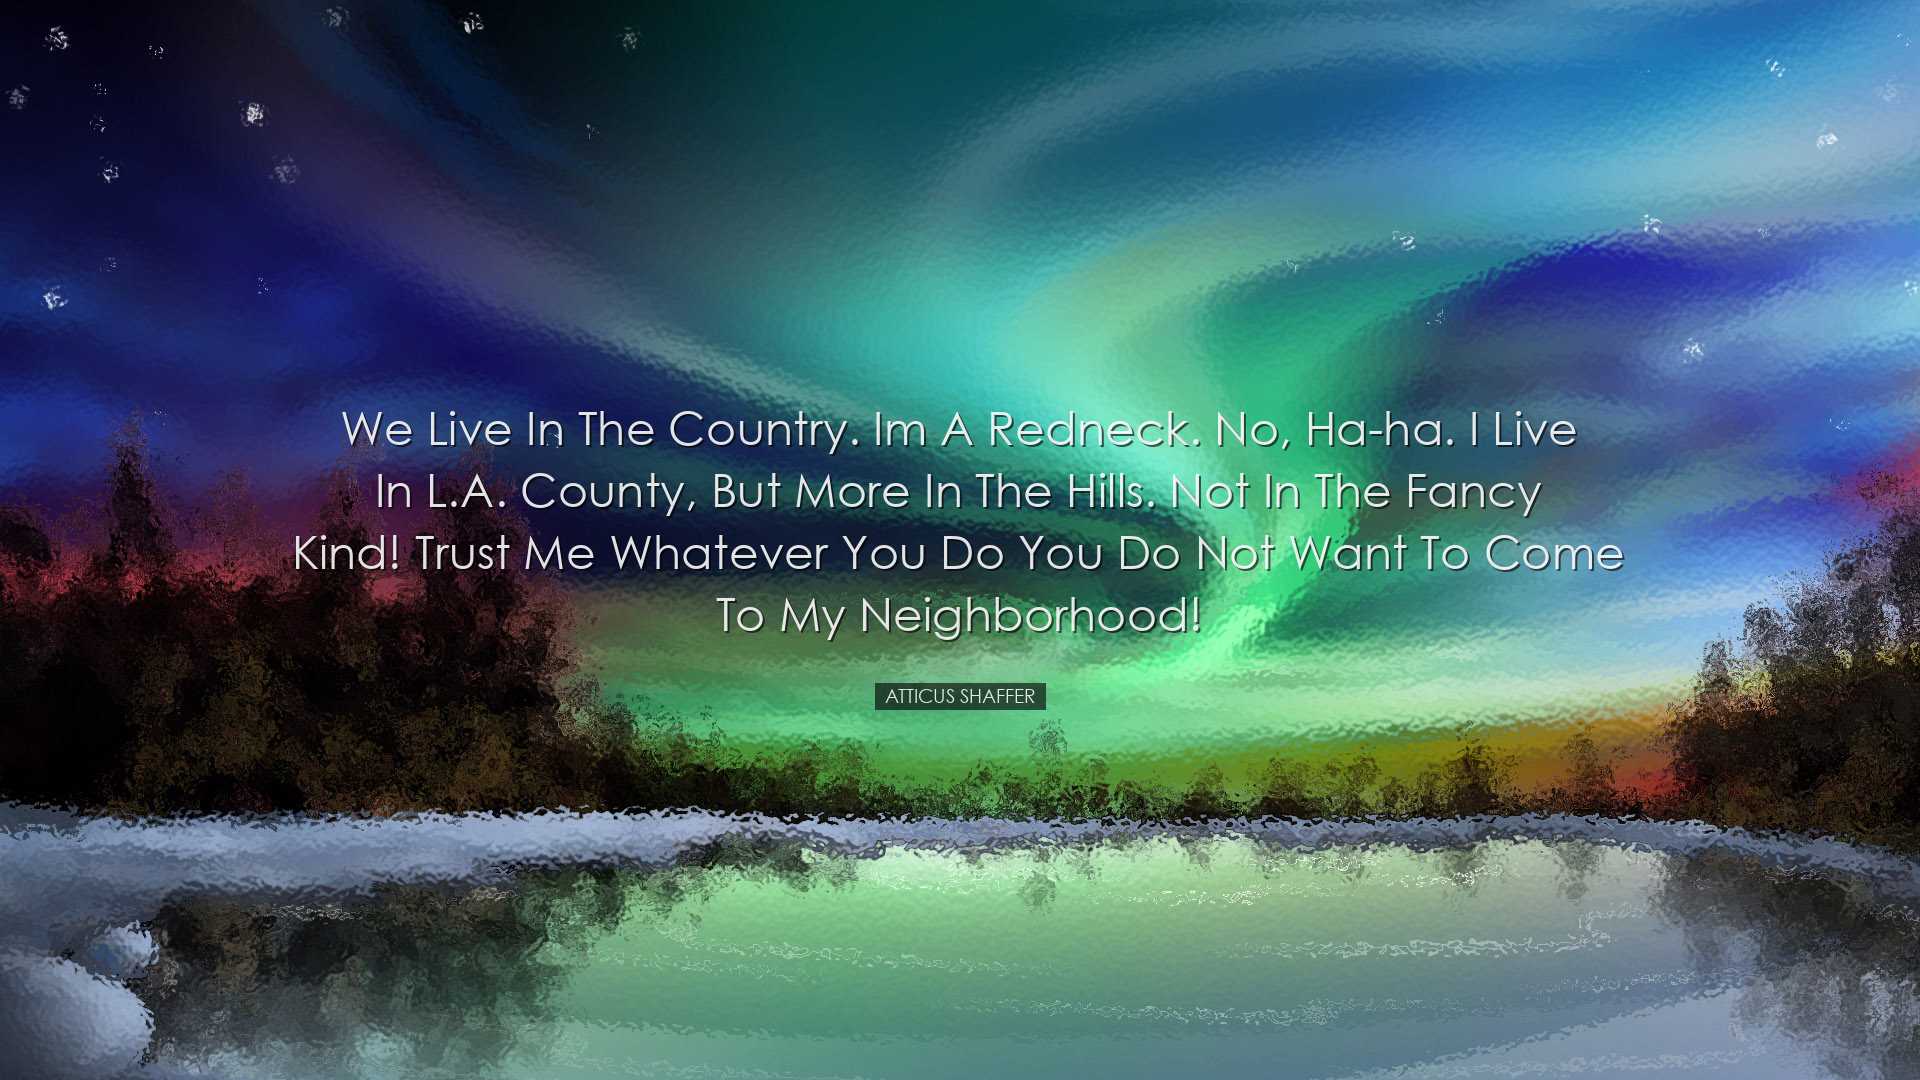 We live in the country. Im a redneck. No, ha-ha. I live in L.A. Co